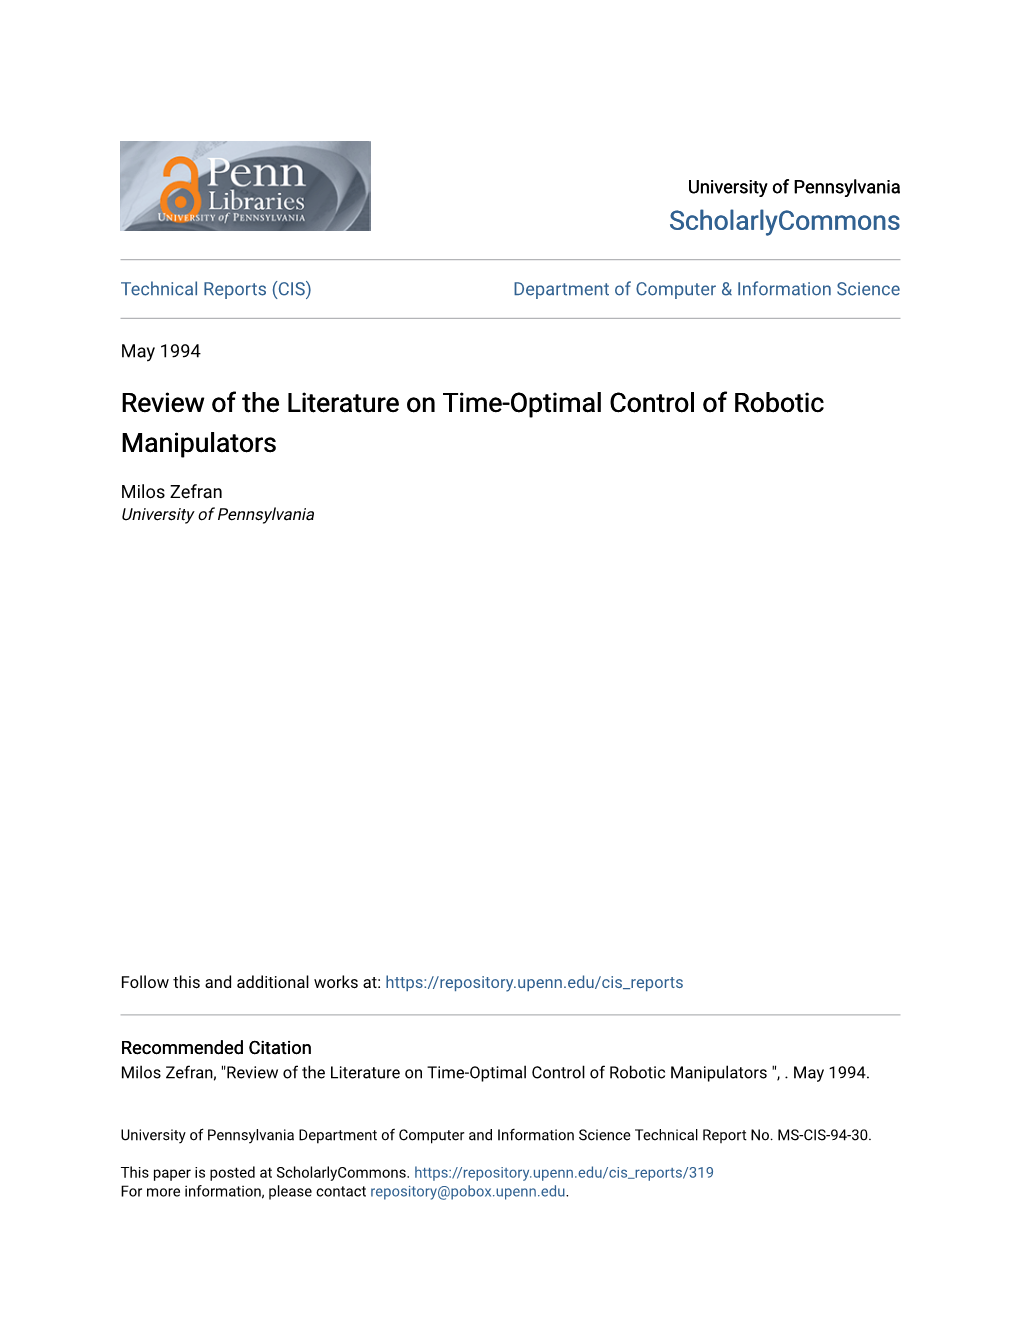 Review of the Literature on Time-Optimal Control of Robotic Manipulators